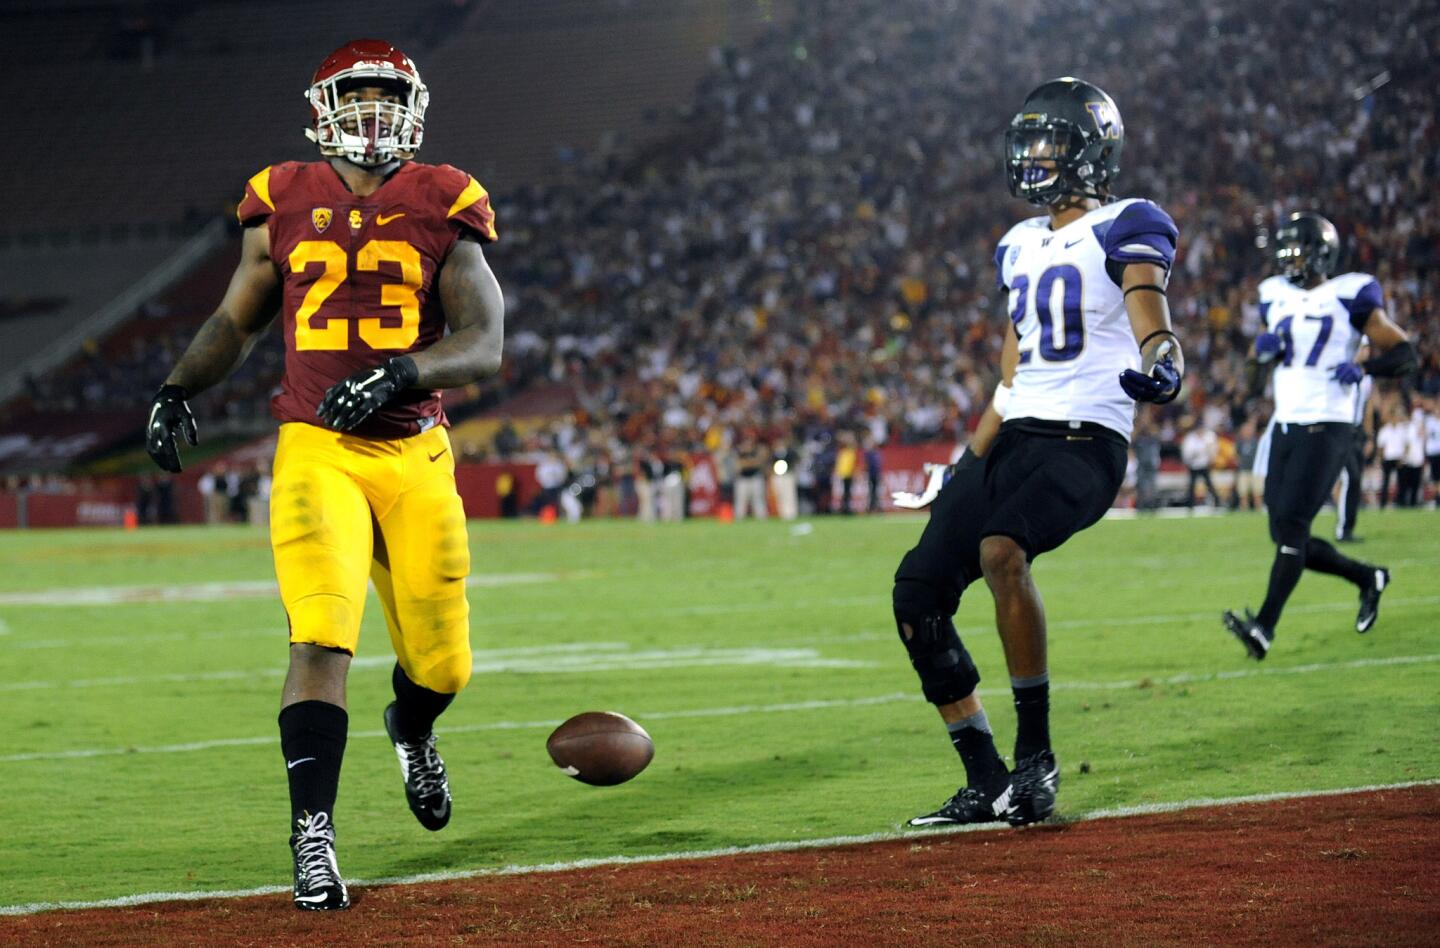 USC running back Tre Madden drops the ball on a two-point conversion against Washington in the fourth quarter at the Coliseum on Thursday.